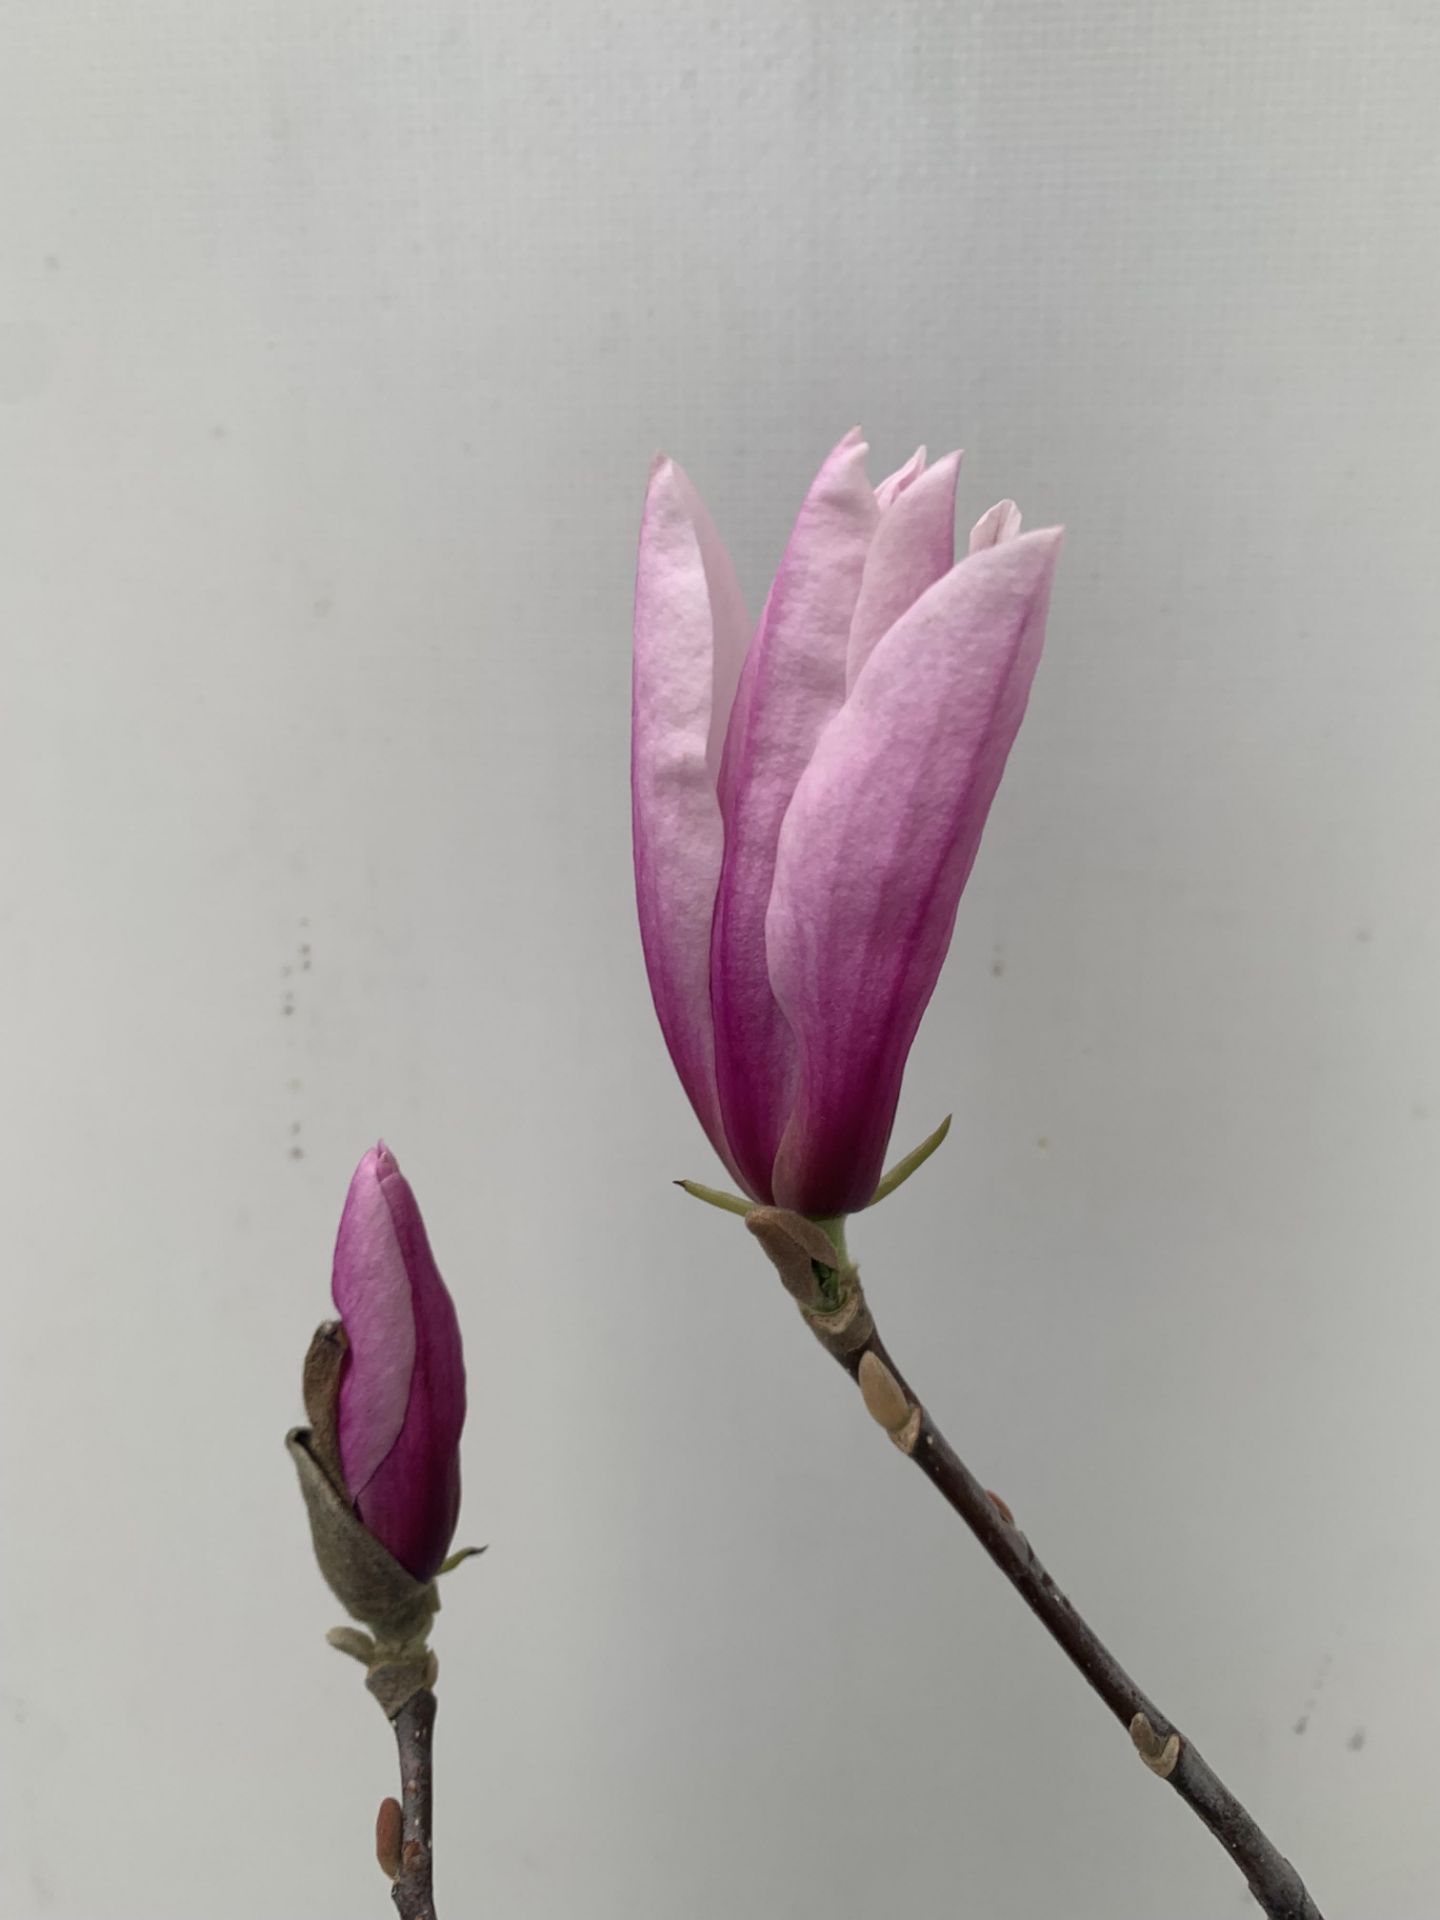 ONE MAGNOLIA PINK 'BETTY' APPROX 120CM IN HEIGHT IN 7 LTR POT PLUS VAT - Image 5 of 12